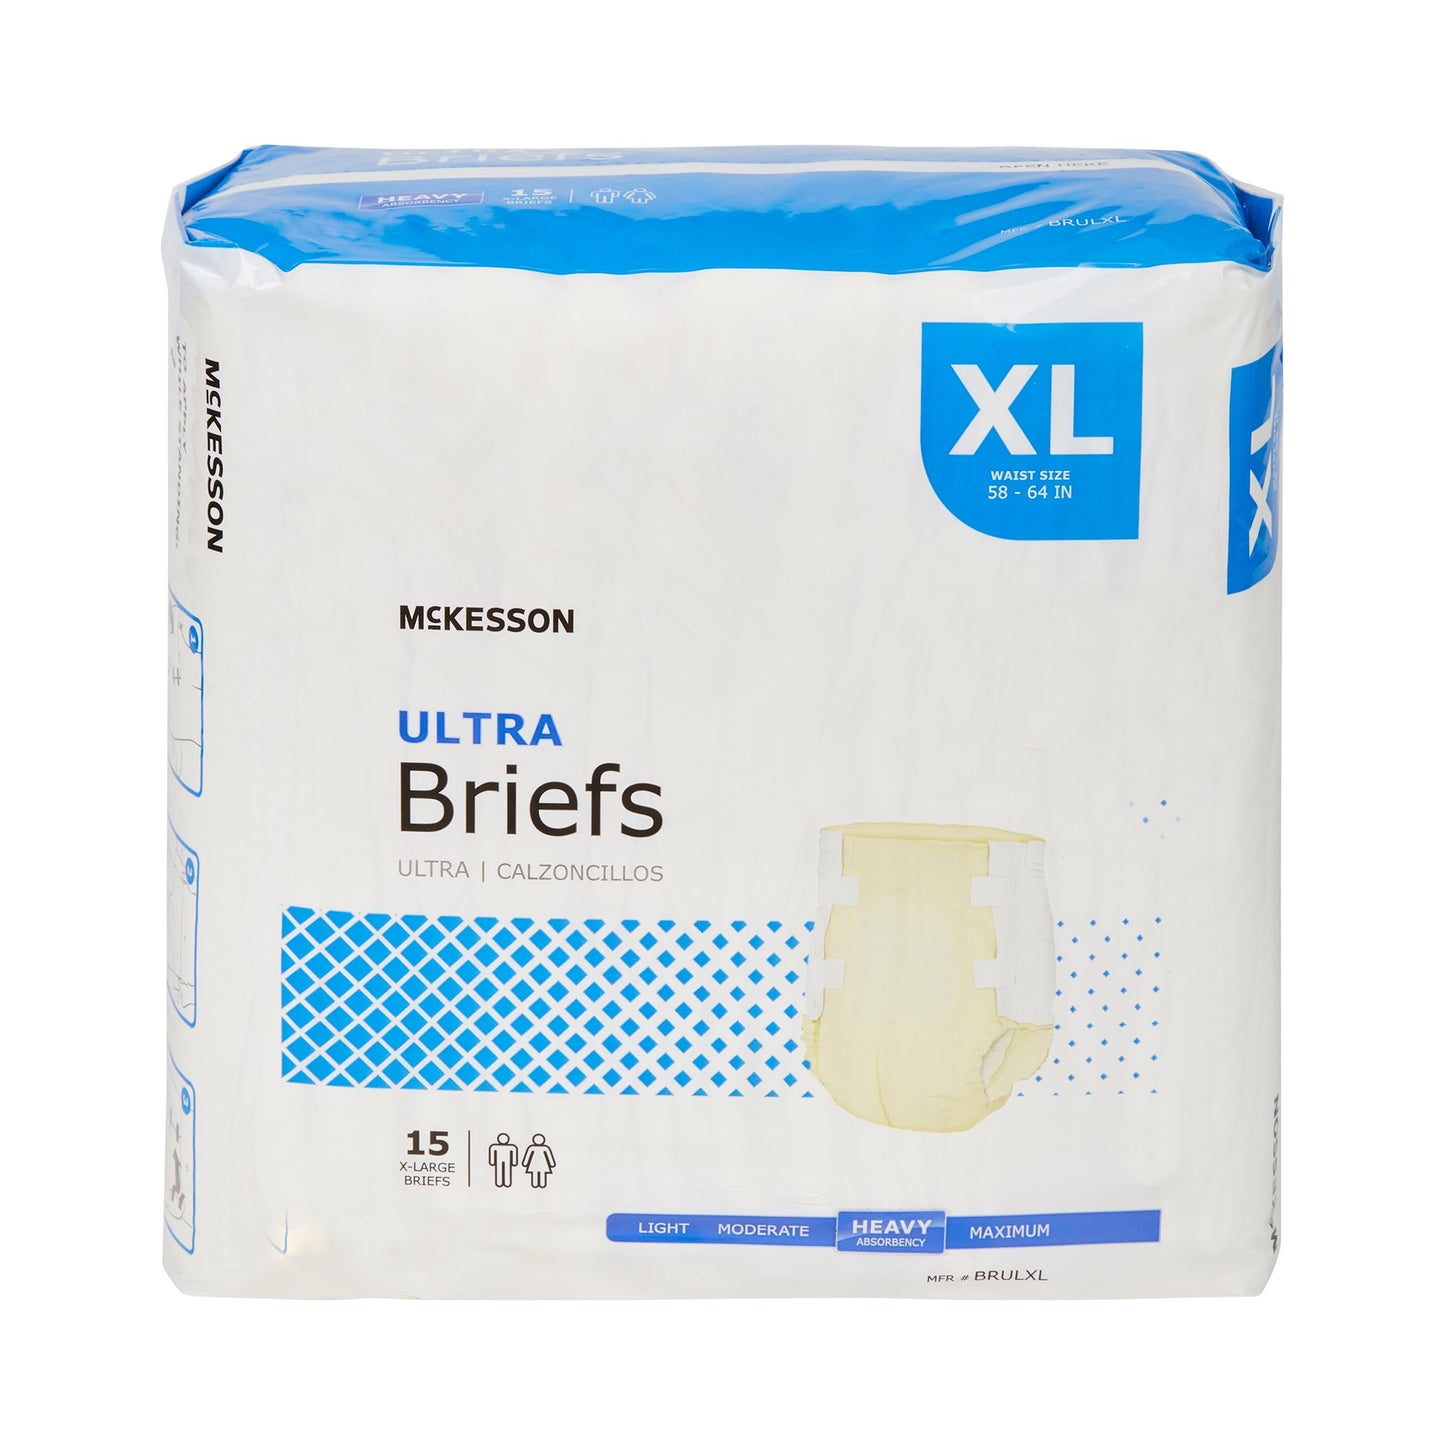 McKesson Ultra Heavy Absorbency Incontinence Brief, X-Large, 15 ct